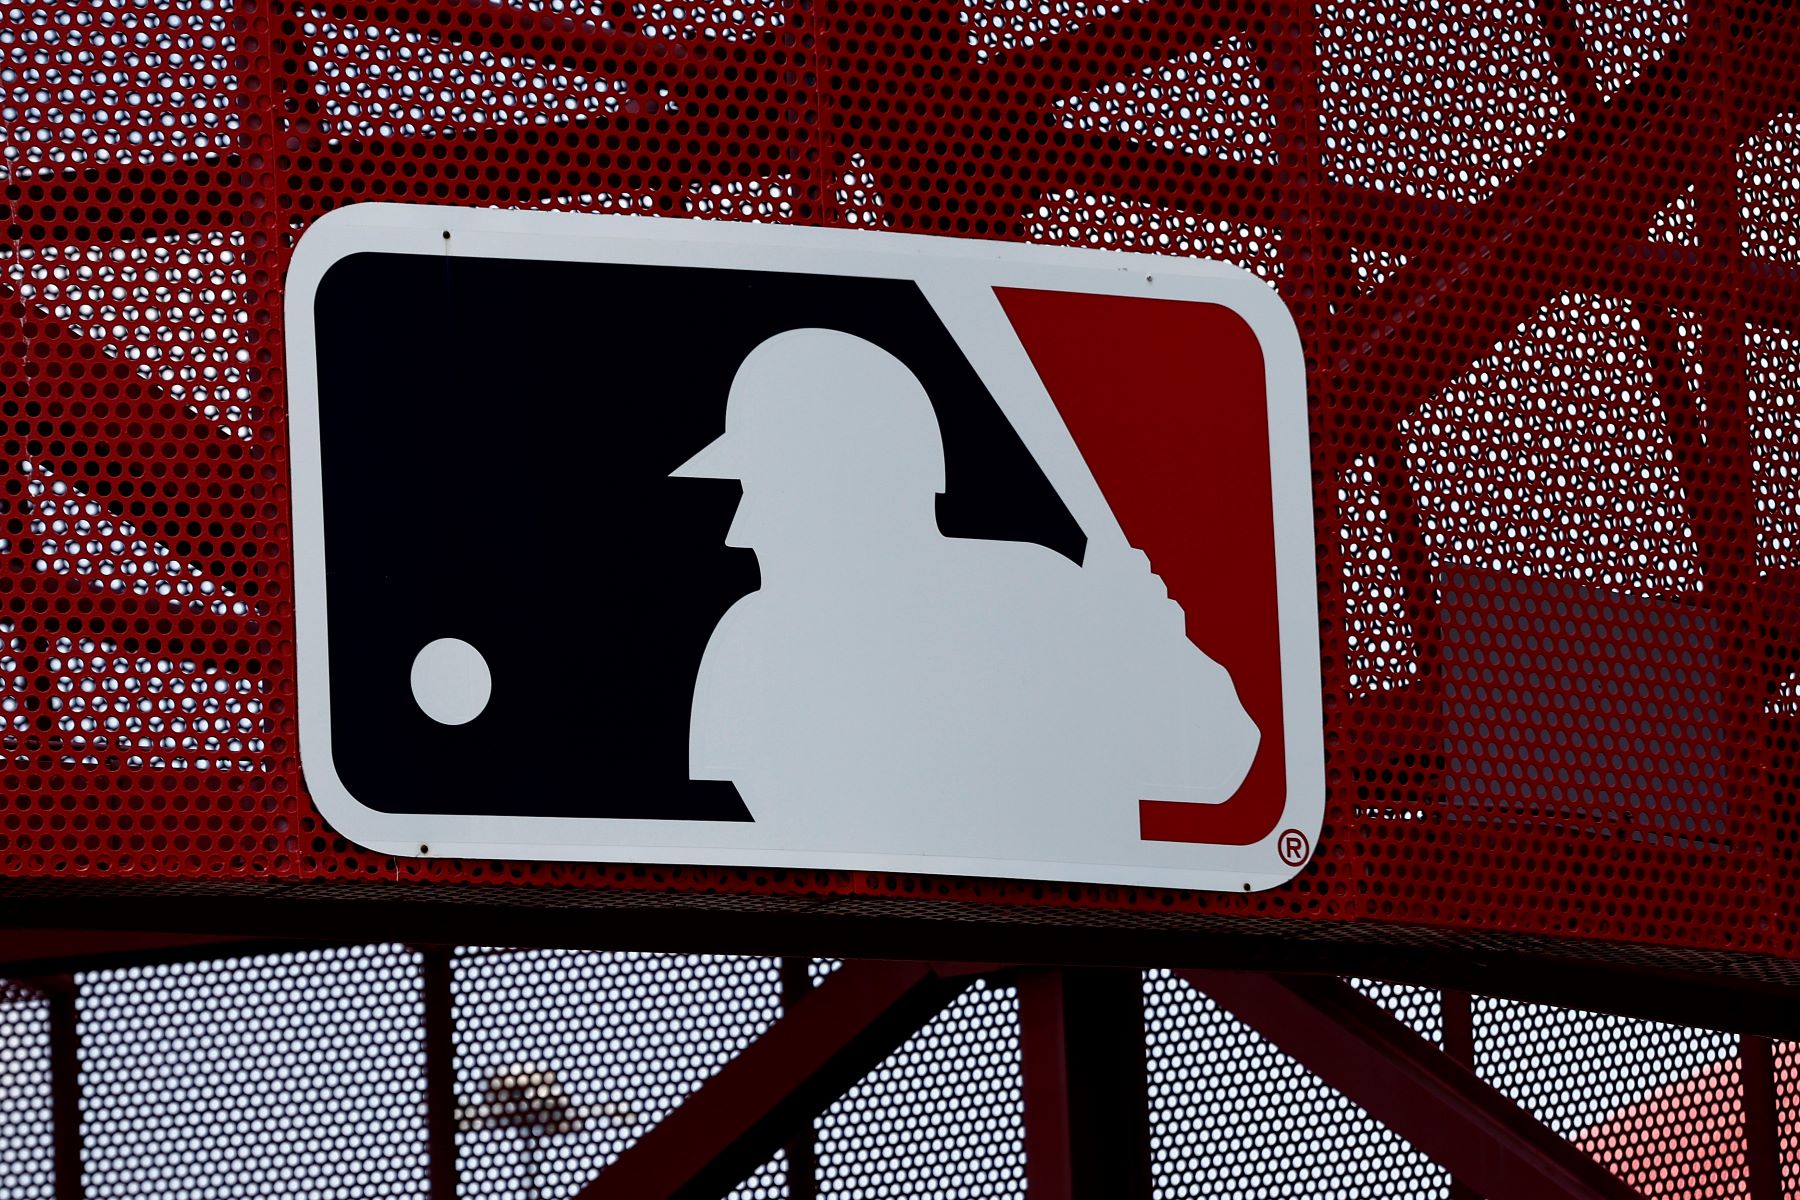 MLB (Major League Baseball) logo seen during a game between the Oakland Athletics and the Los Angeles Angels